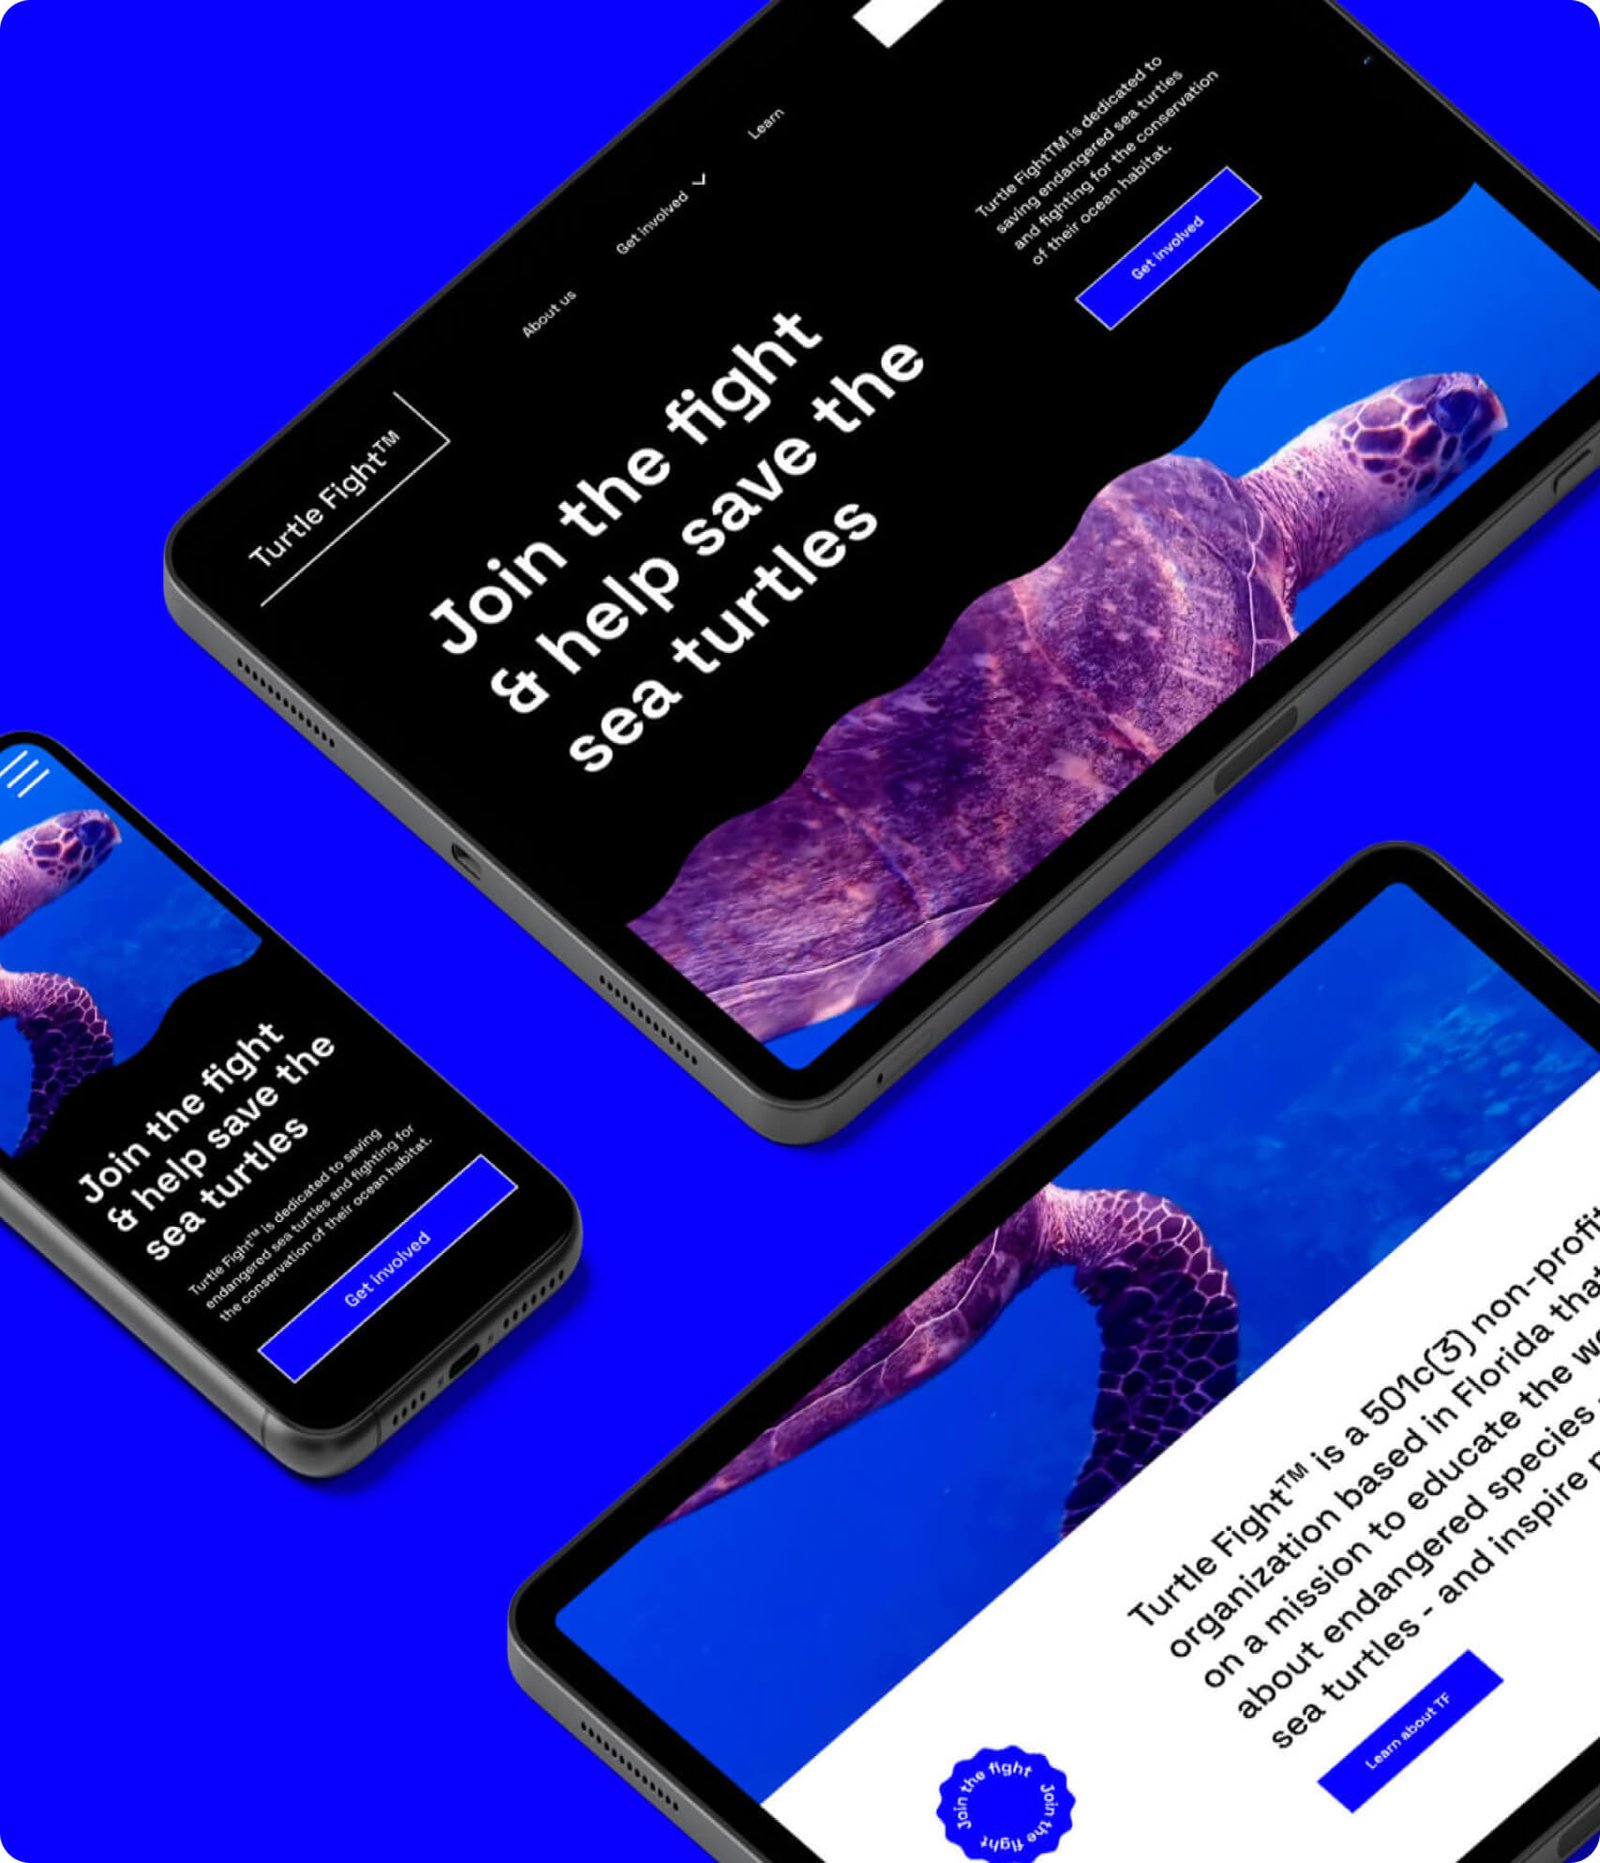 Turtle Fight is a responsive website that allows users to get involved with and donate towards sea turtle conservation